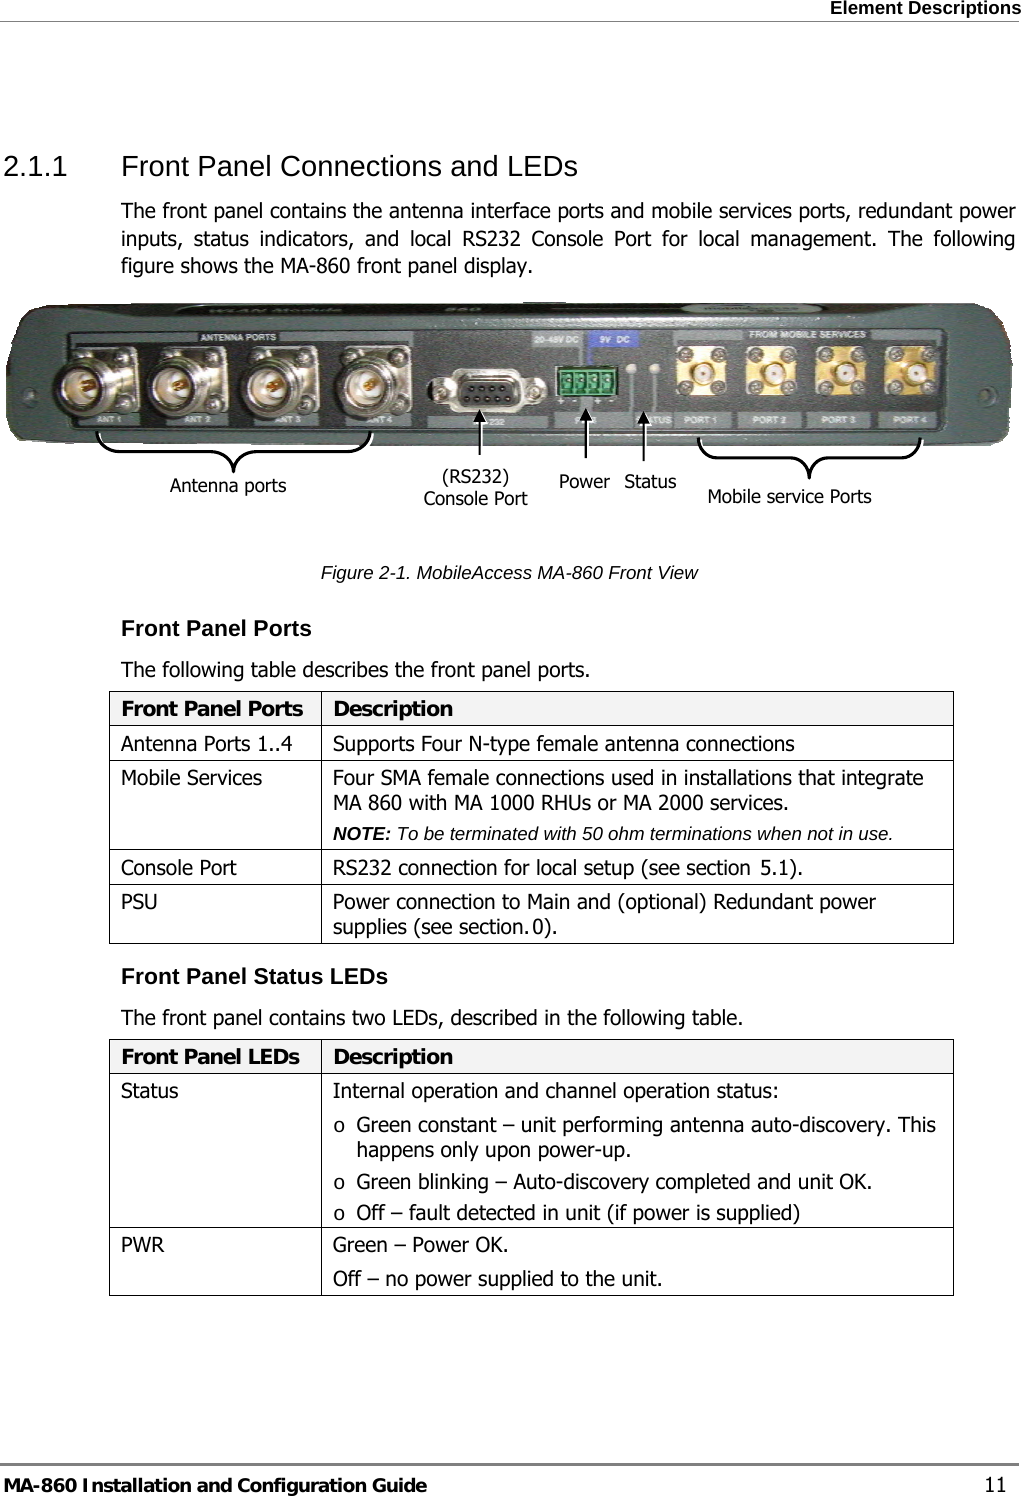  Element Descriptions  2.1.1  Front Panel Connections and LEDs The front panel contains the antenna interface ports and mobile services ports, redundant power inputs, status indicators, and local RS232 Console Port for local management. The following figure shows the MA-860 front panel display.  Antenna ports  Mobile service Ports  (RS232) Console Port  Power Status Figure  2-1. MobileAccess MA-860 Front View Front Panel Ports The following table describes the front panel ports. Front Panel Ports  Description Antenna Ports 1..4   Supports Four N-type female antenna connections Mobile Services  Four SMA female connections used in installations that integrate MA 860 with MA 1000 RHUs or MA 2000 services.  NOTE: To be terminated with 50 ohm terminations when not in use. Console Port  RS232 connection for local setup (see section  5.1).  PSU  Power connection to Main and (optional) Redundant power supplies (see section. 0). Front Panel Status LEDs The front panel contains two LEDs, described in the following table.  Front Panel LEDs  Description Status  Internal operation and channel operation status: o Green constant – unit performing antenna auto-discovery. This happens only upon power-up. o Green blinking – Auto-discovery completed and unit OK. o Off – fault detected in unit (if power is supplied) PWR  Green – Power OK.  Off – no power supplied to the unit. MA-860 Installation and Configuration Guide    11 